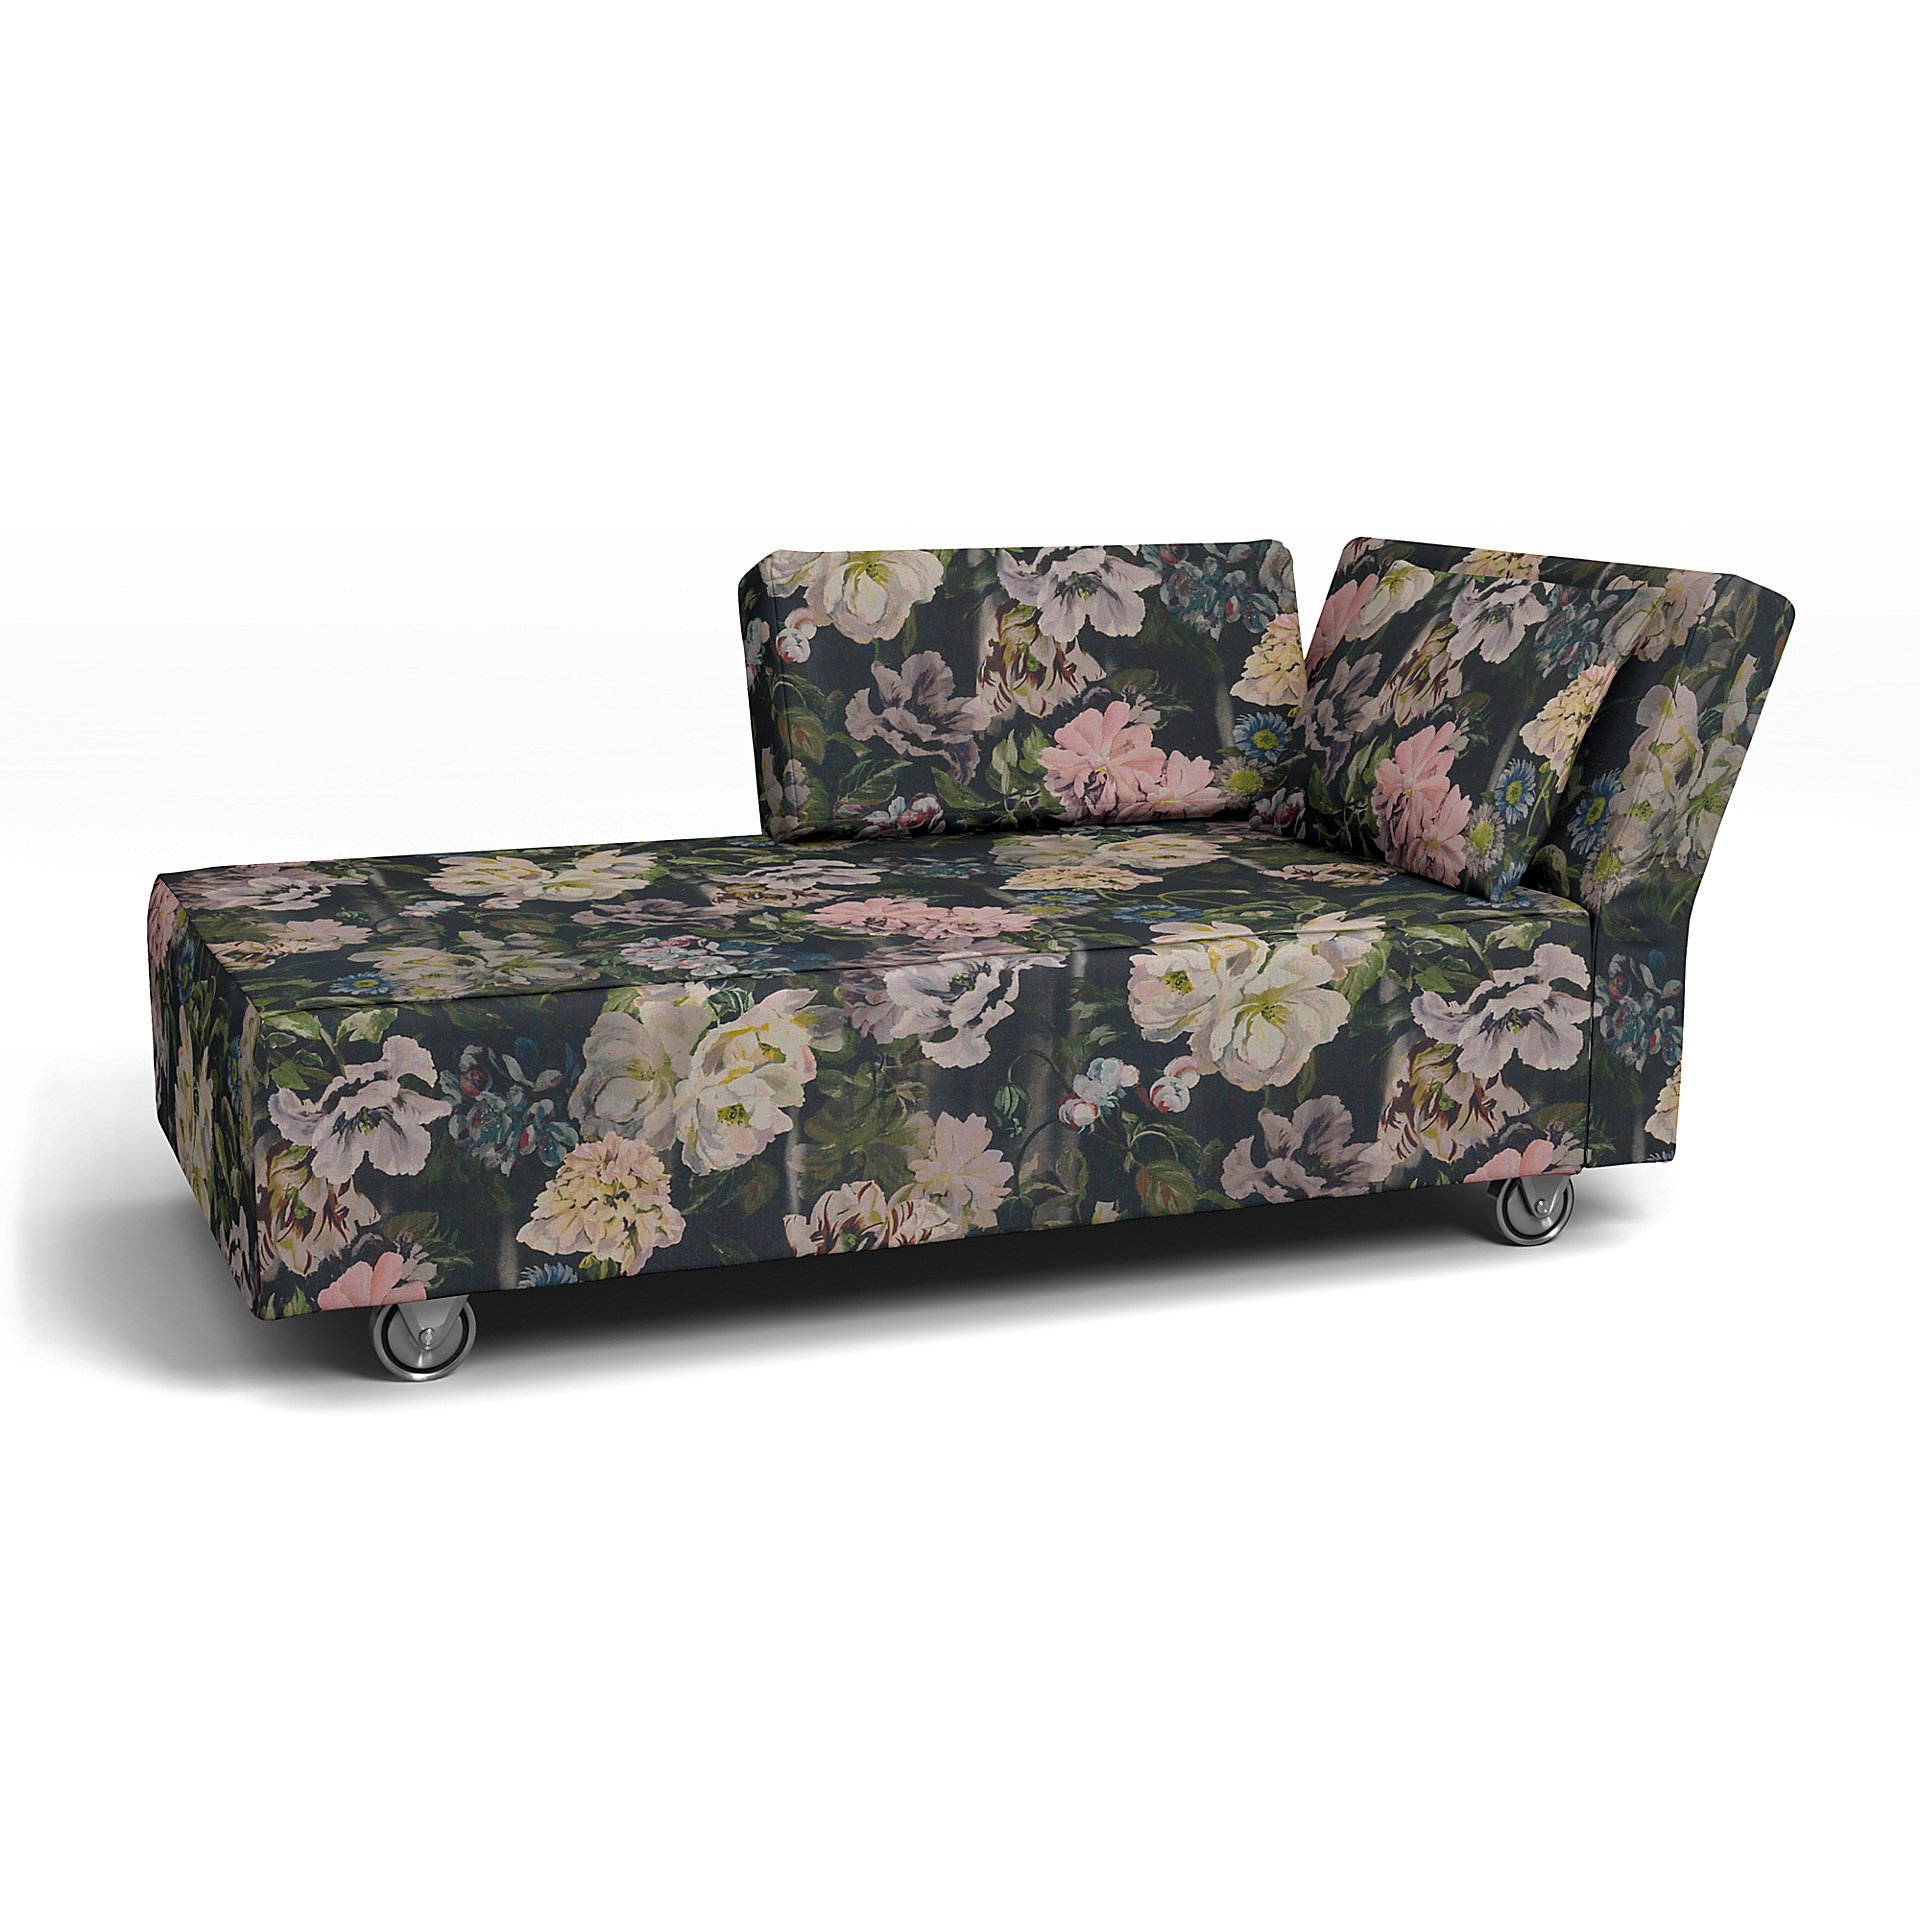 IKEA - Falsterbo Chaise with Right Armrest Cover, Delft Flower - Graphite, Linen - Bemz